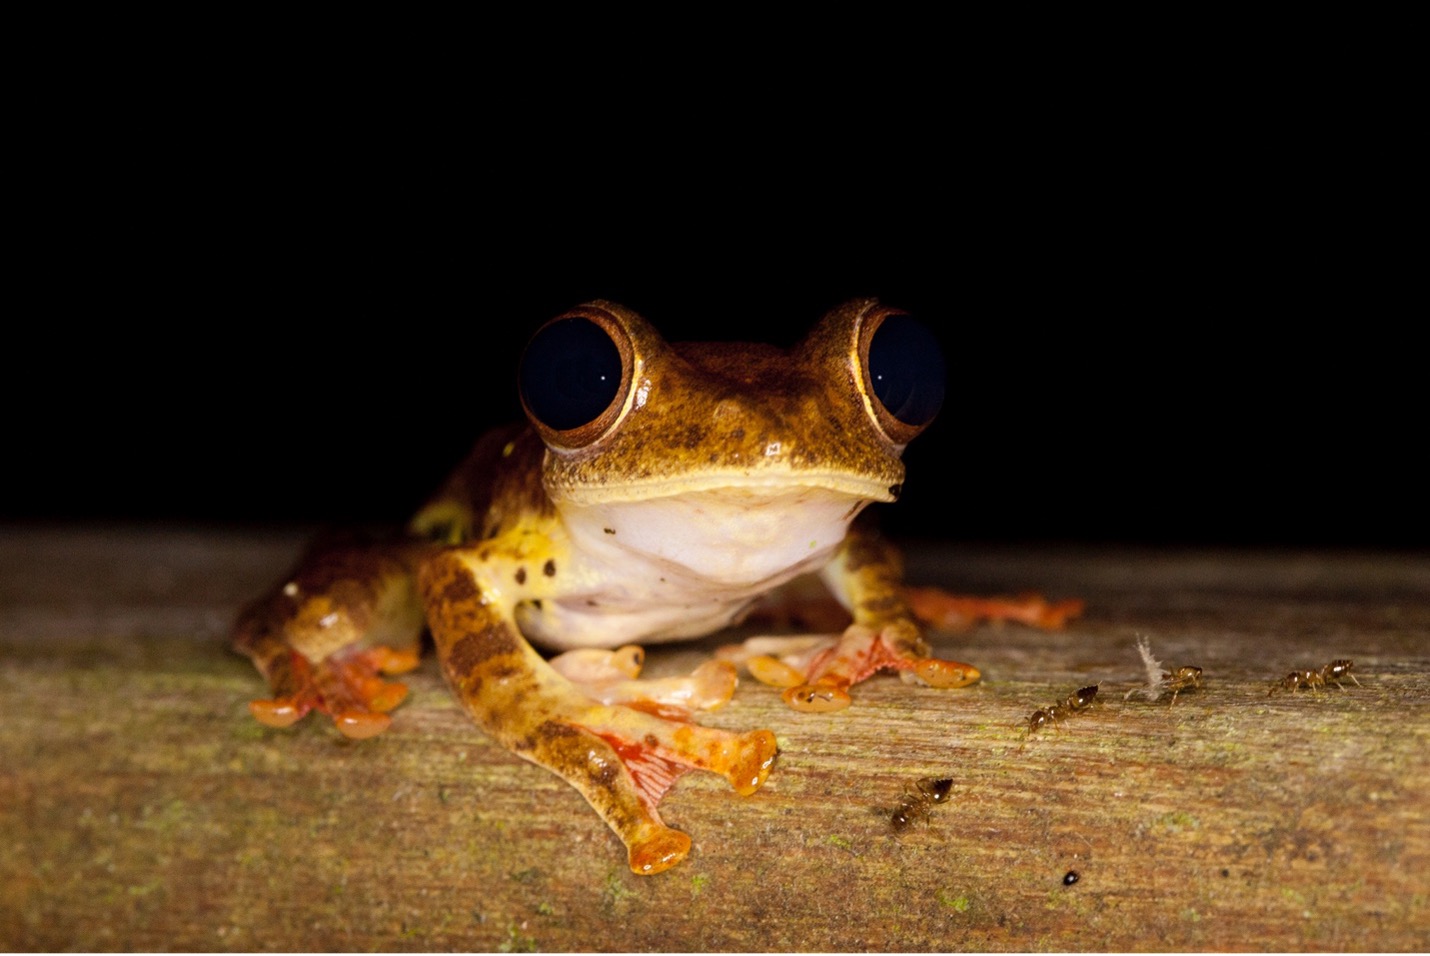 a small frog perches on a branch photographed close-up